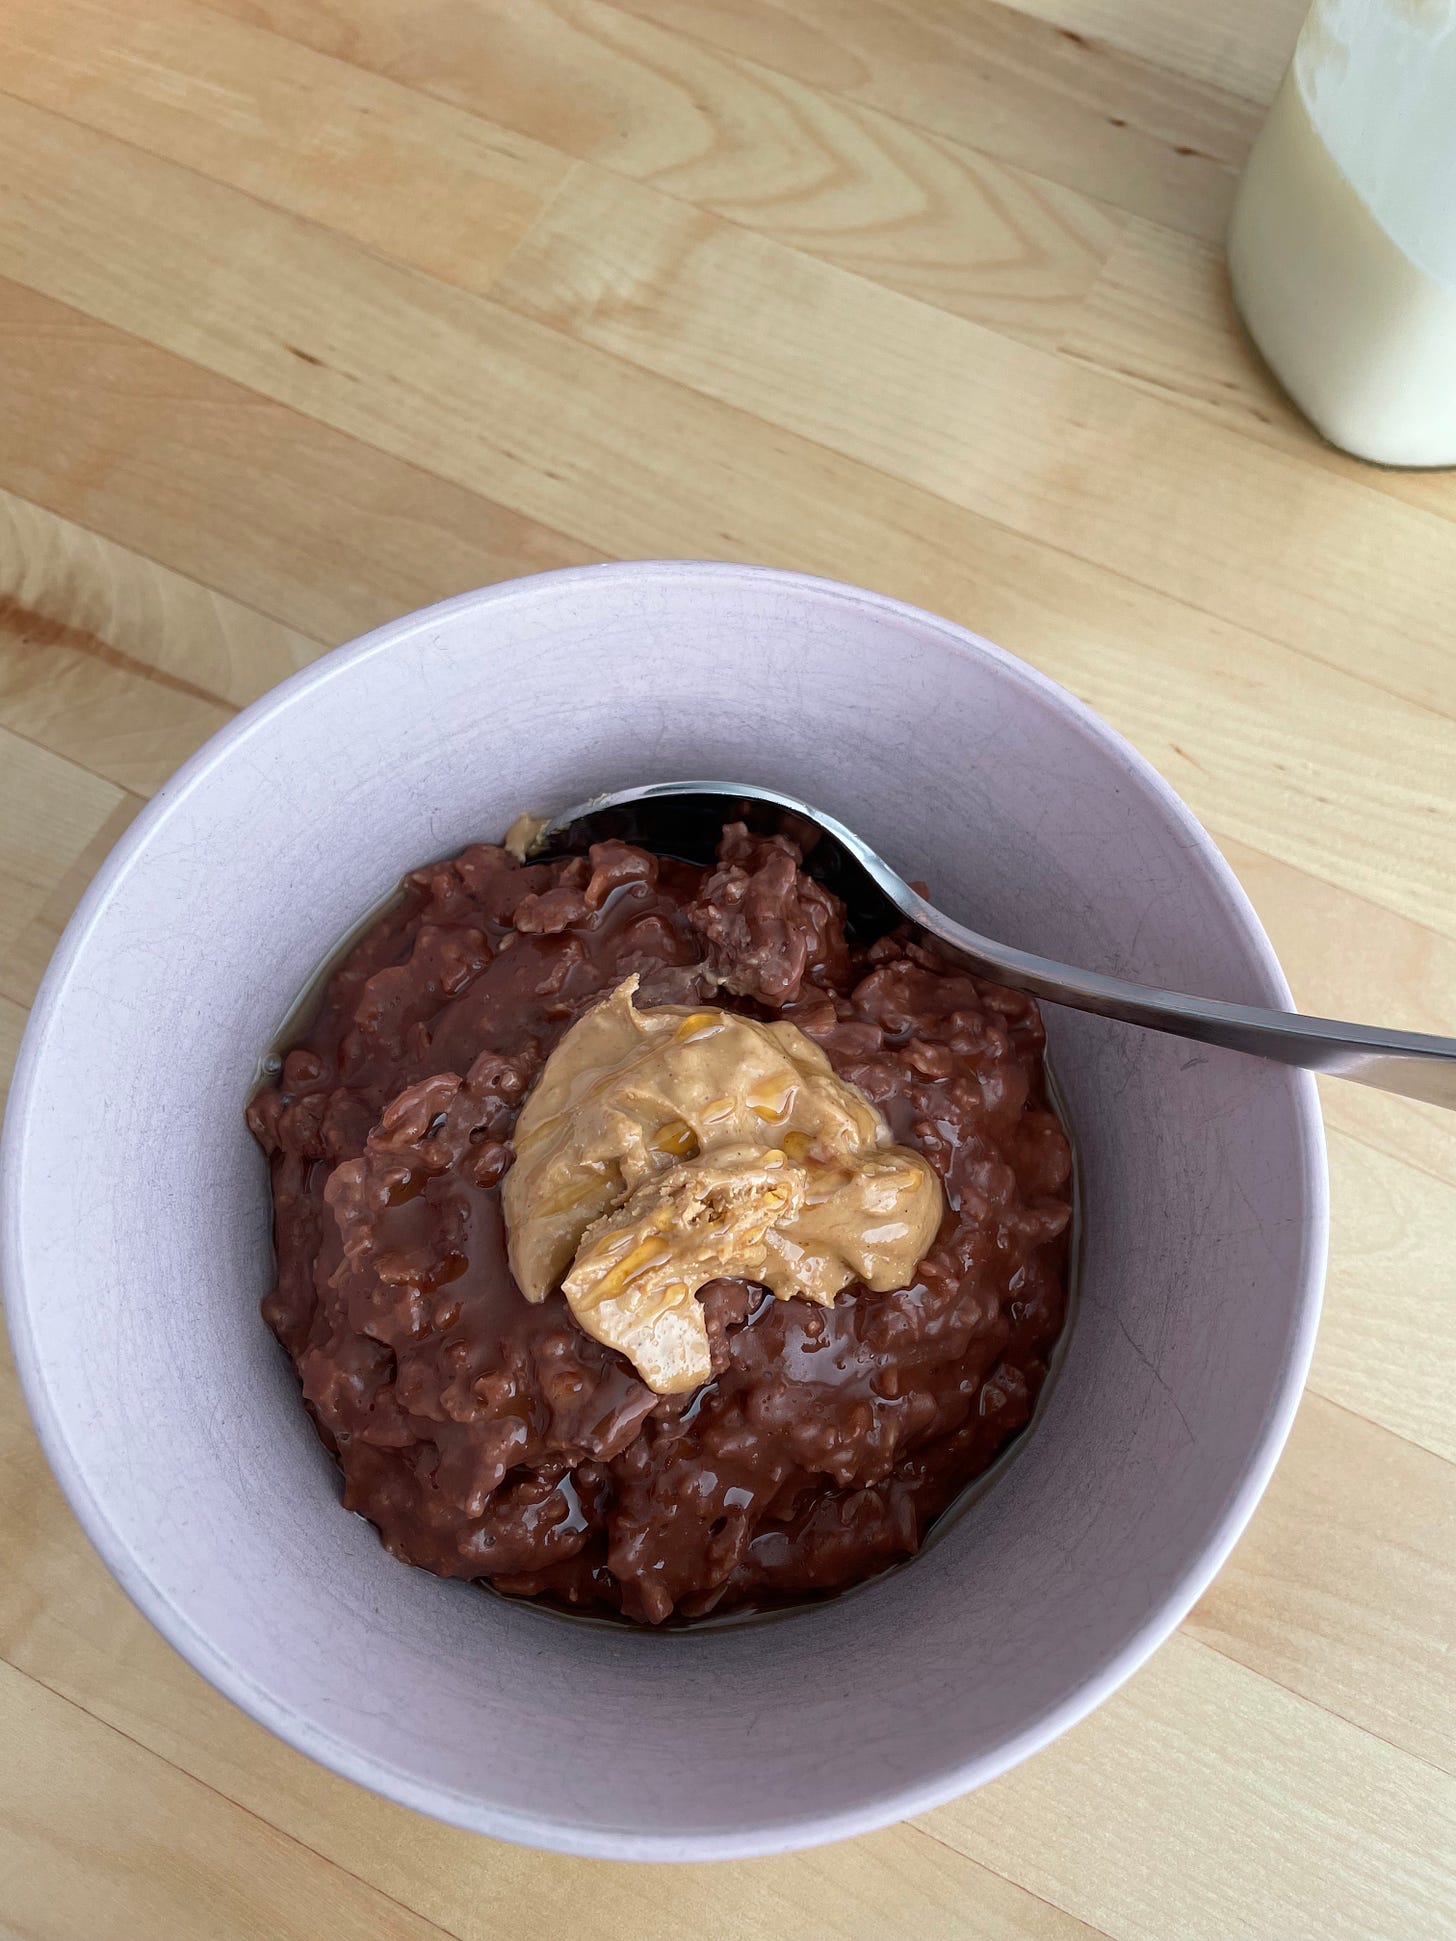 Breakfast is a bowl of cocoa porridge with almond butter from Genius Recipes.